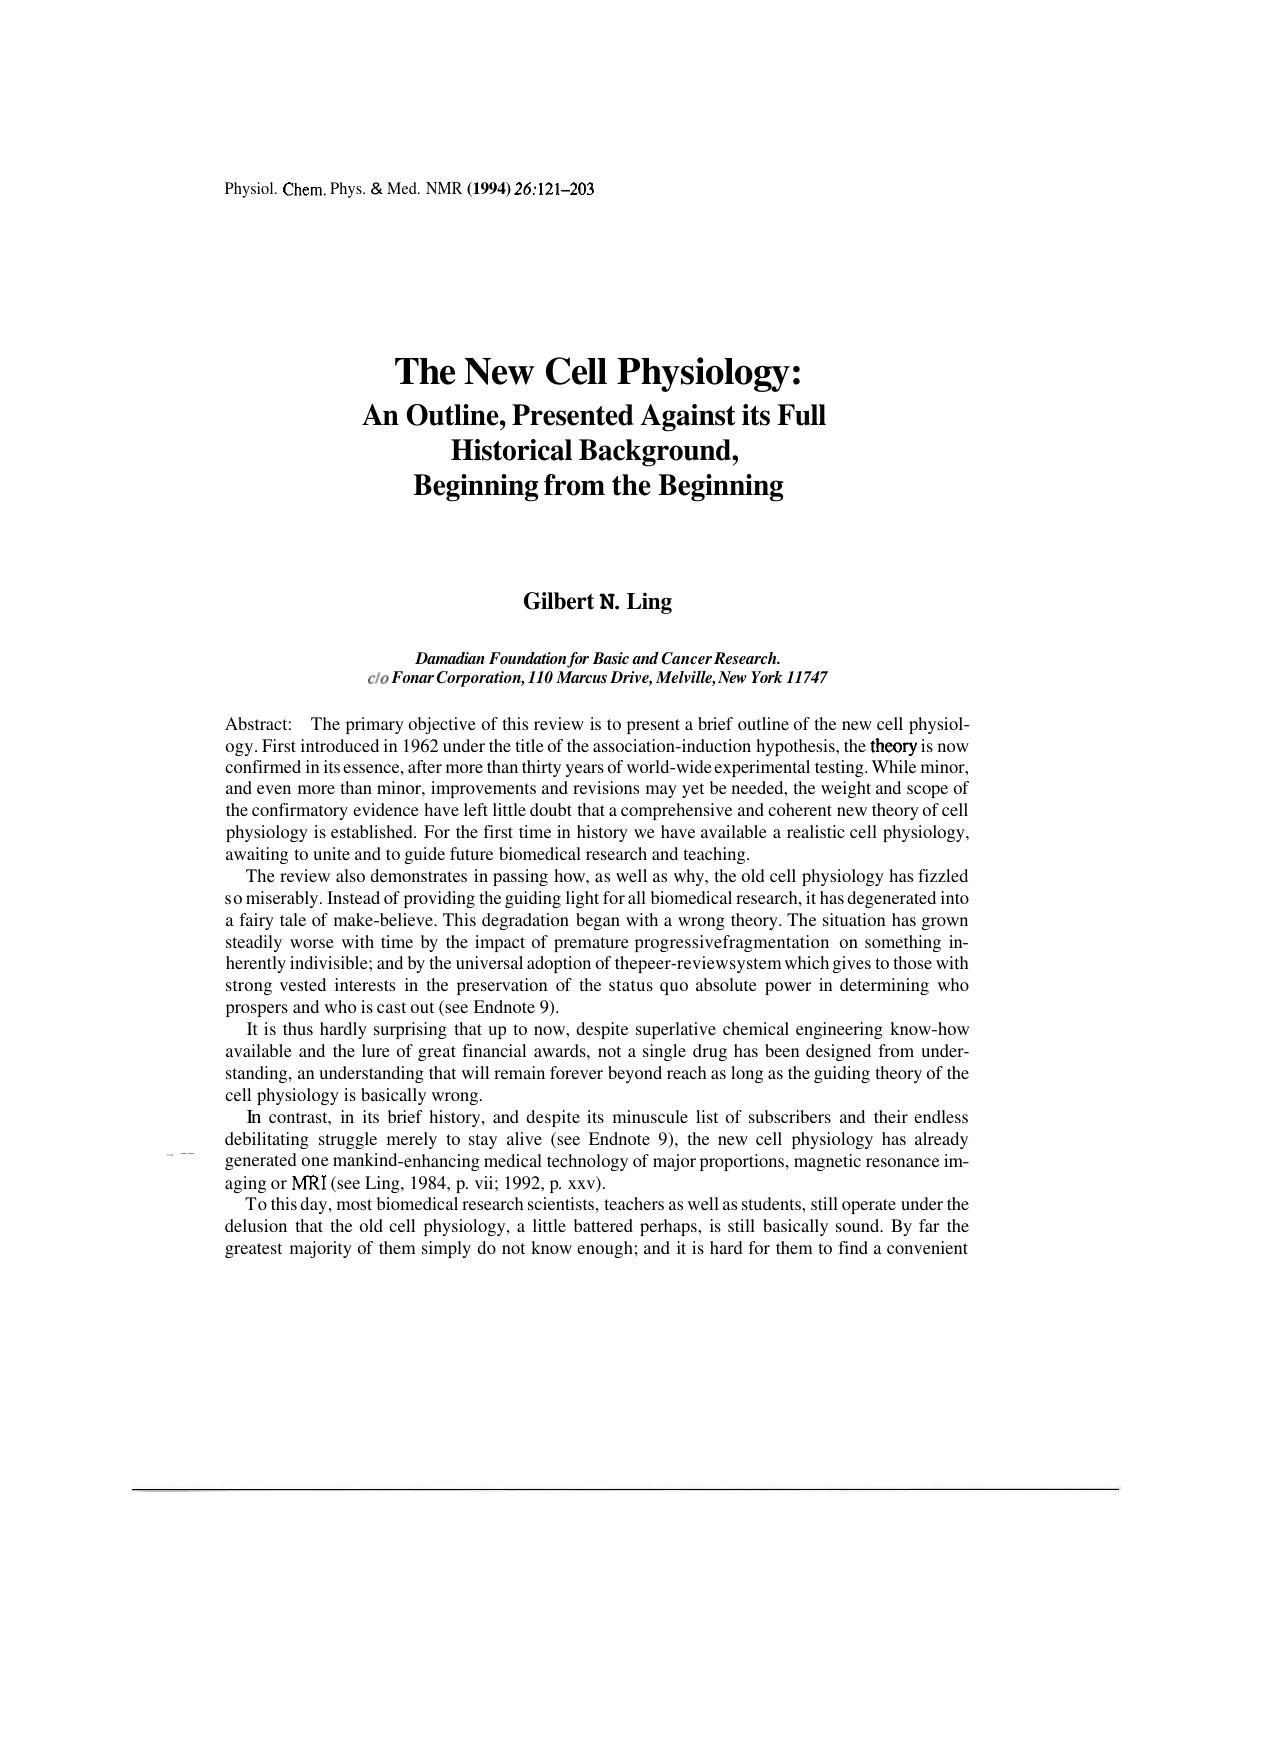 THE NEW CELL PHYSIOLOGY 1994